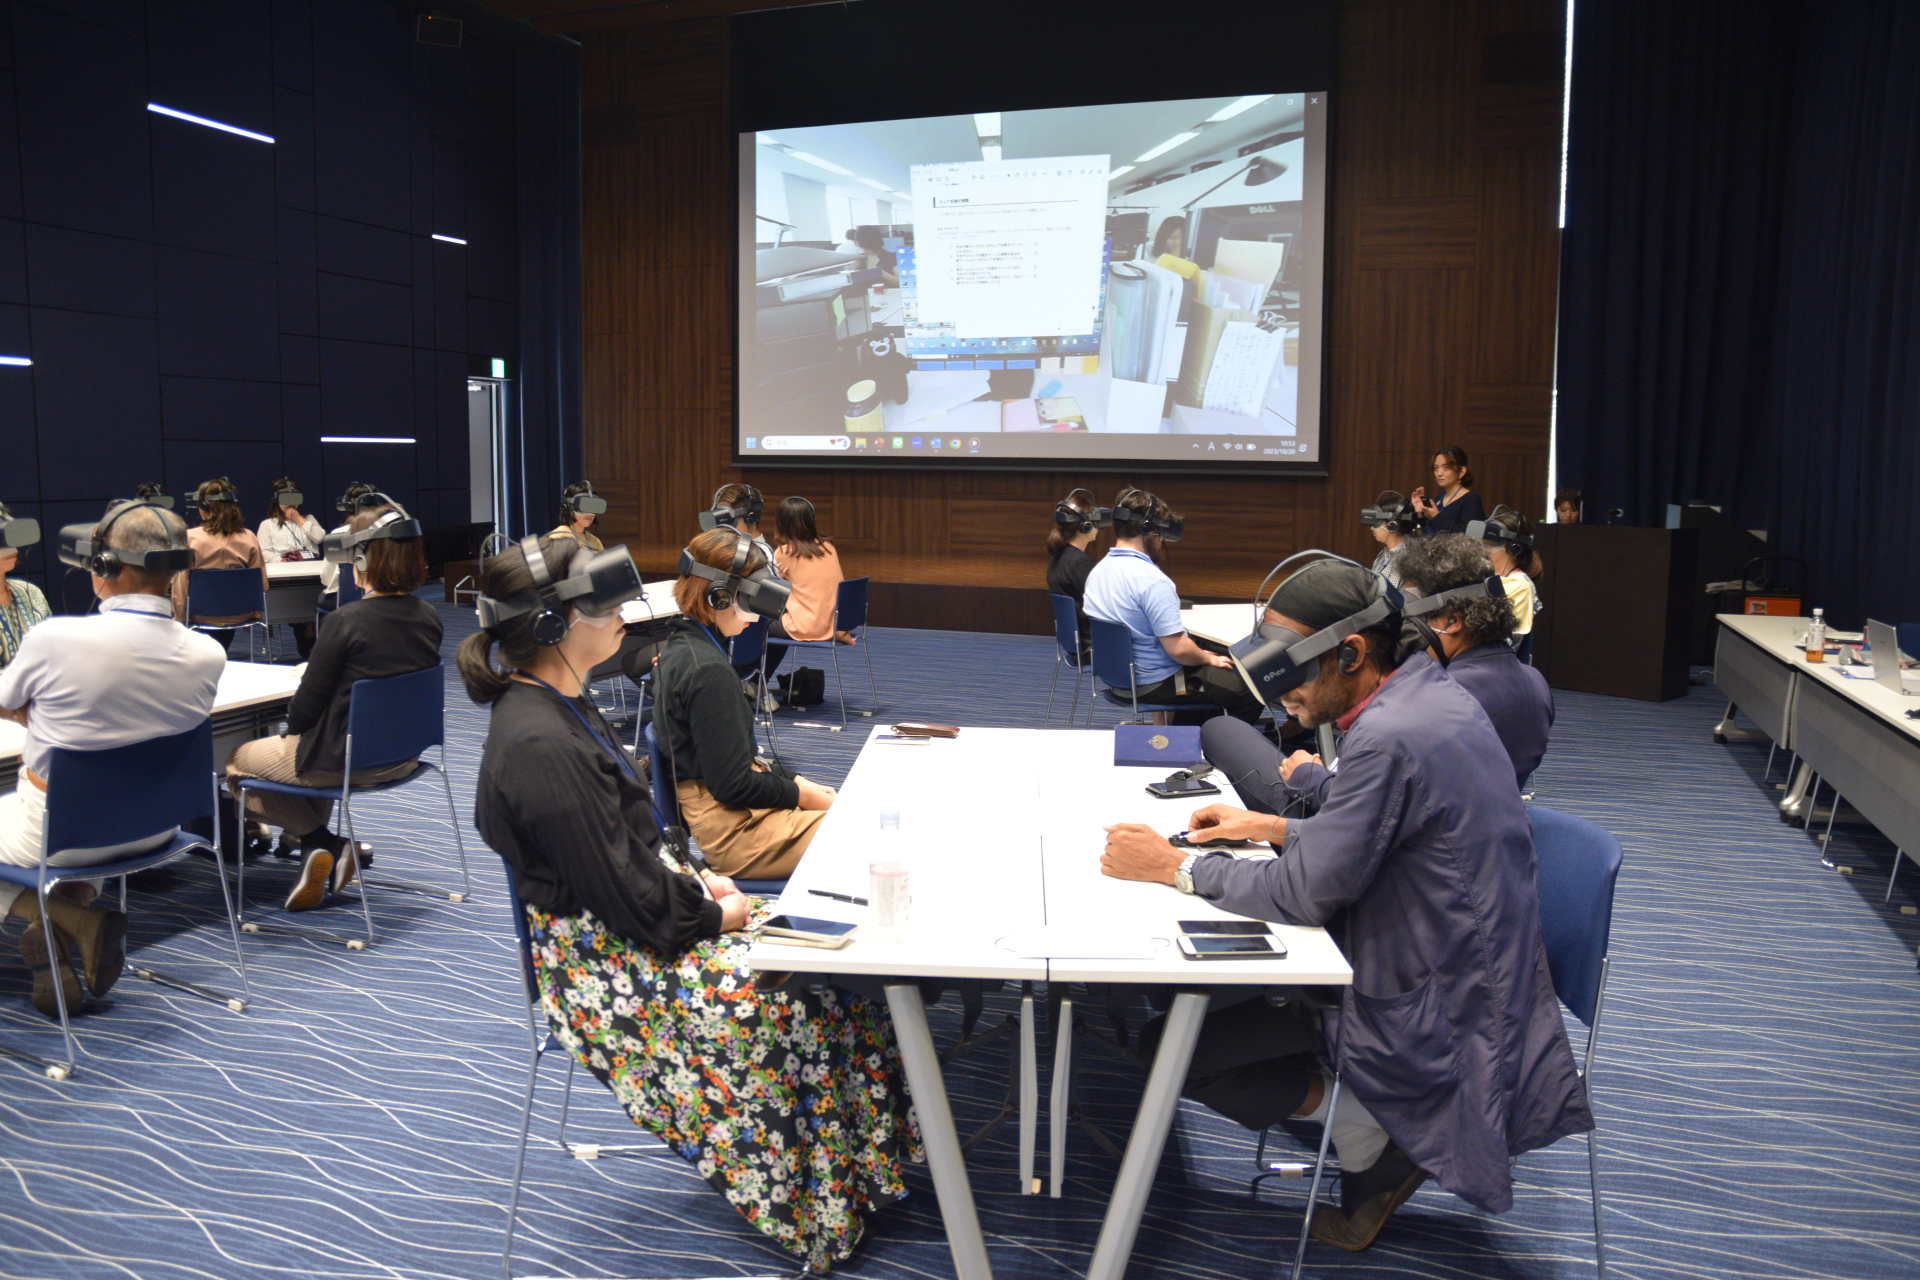 Reflecting on unconscious bias in the workplace using virtual reality<br>D&I Division organizes special training sessions for staff